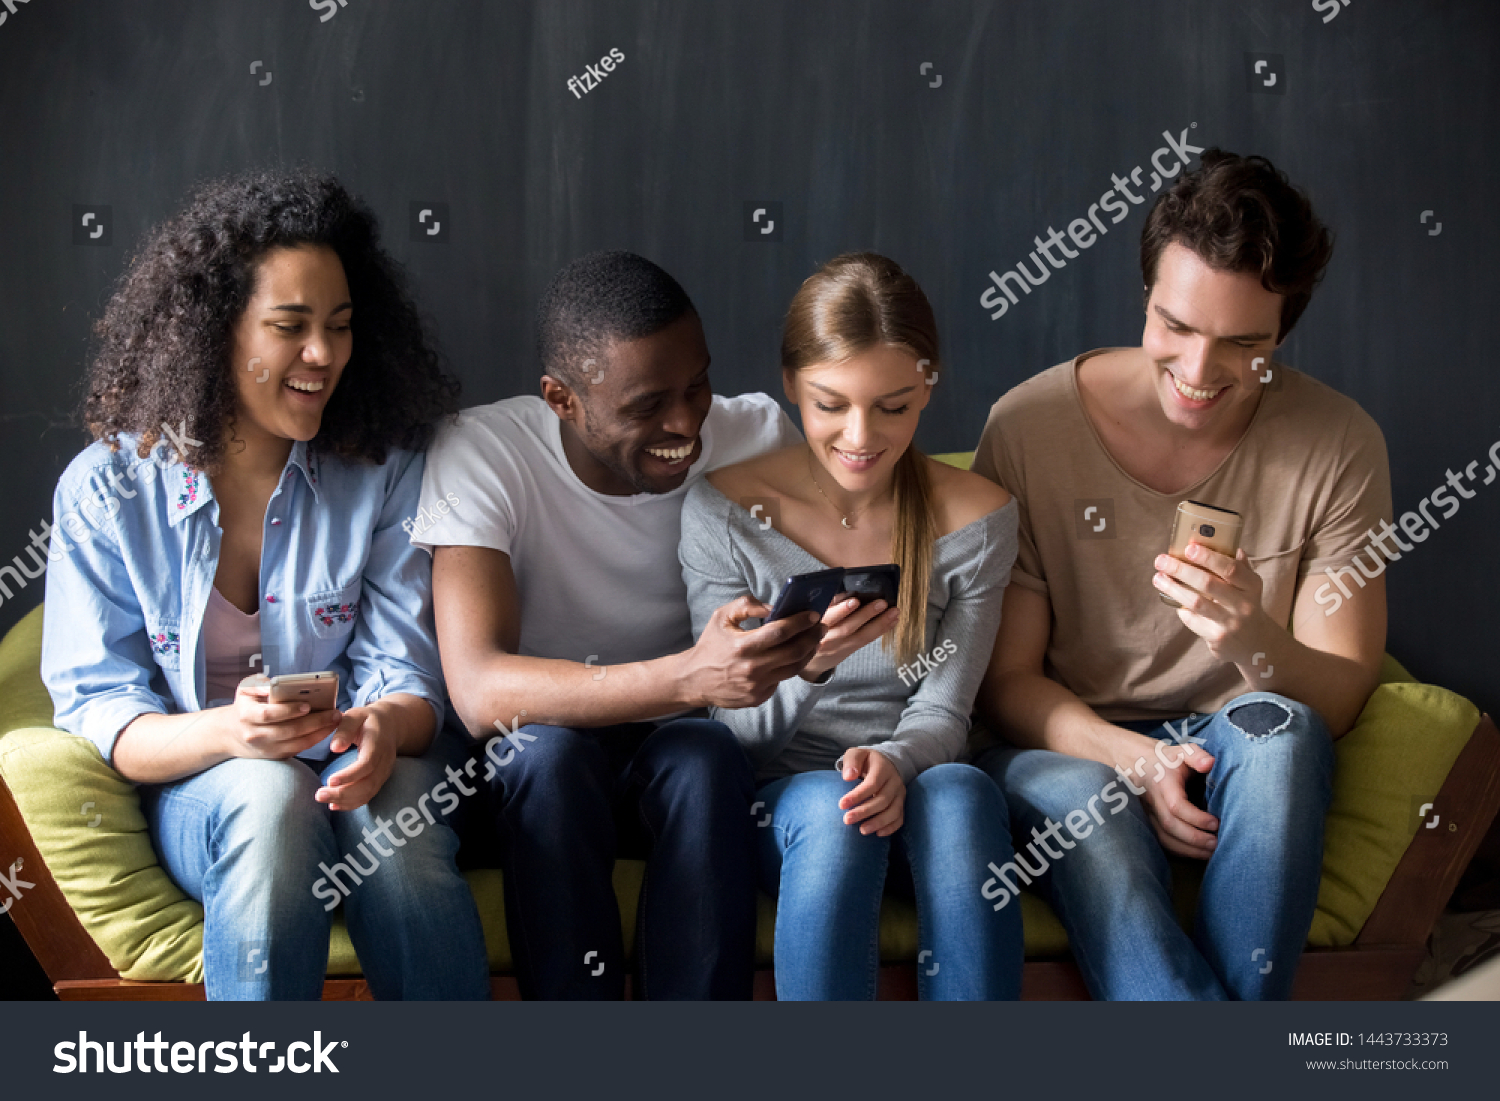 Happy excited smiling diverse friends sitting on couch, discussing new apps for mobile phones, sharing contacts, laughing at funny videos or party photos, playing games, teen mobile addiction concept. #1443733373